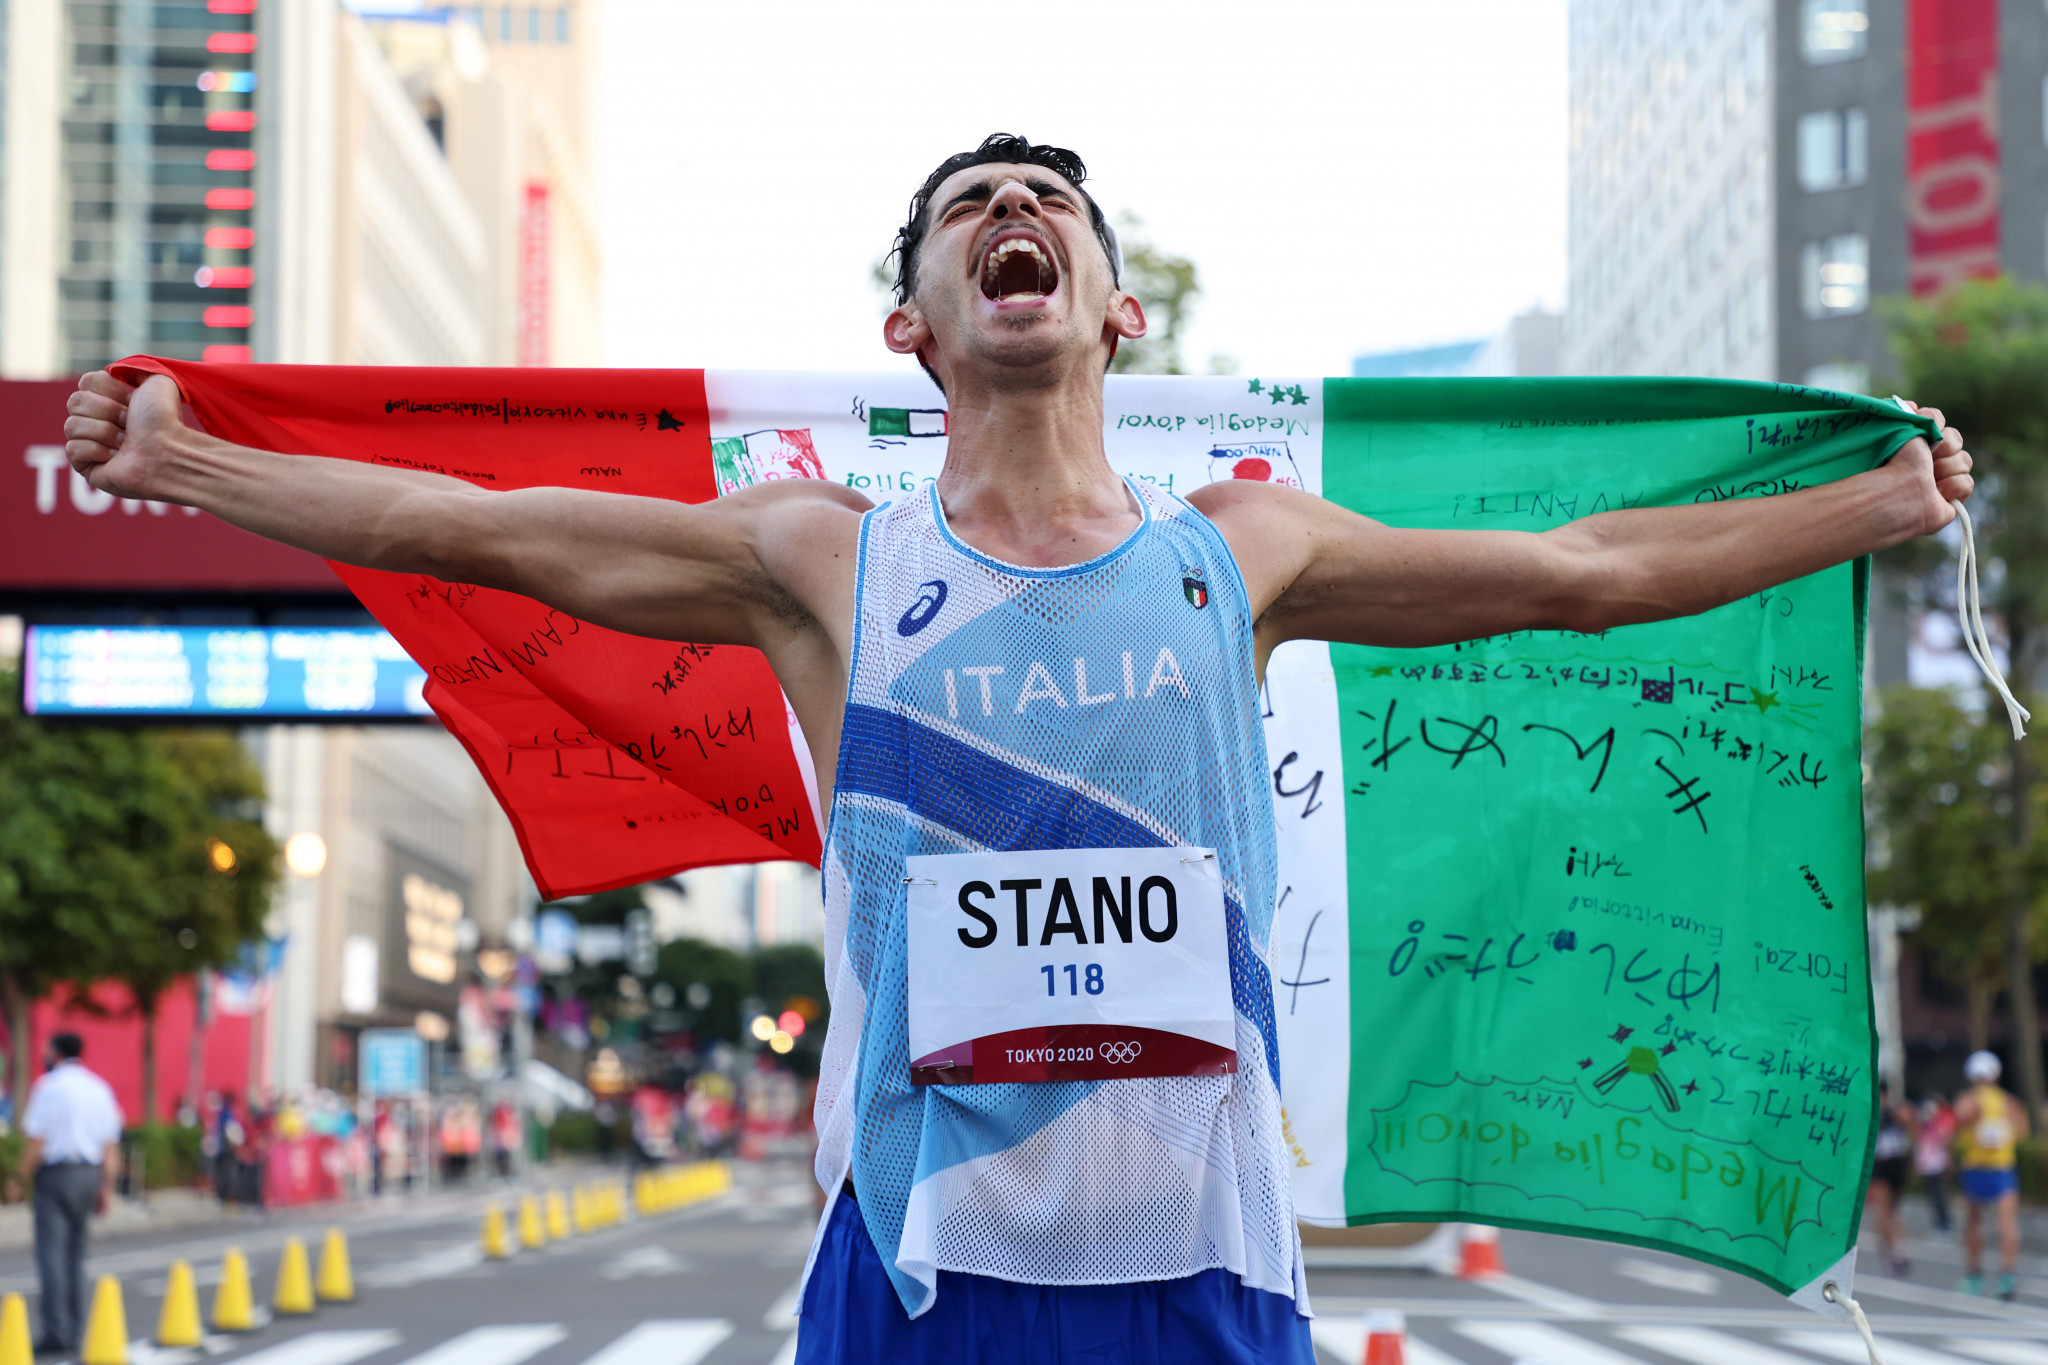 Olympic champion Stano to make 35km debut at Dudince Race Walking Tour